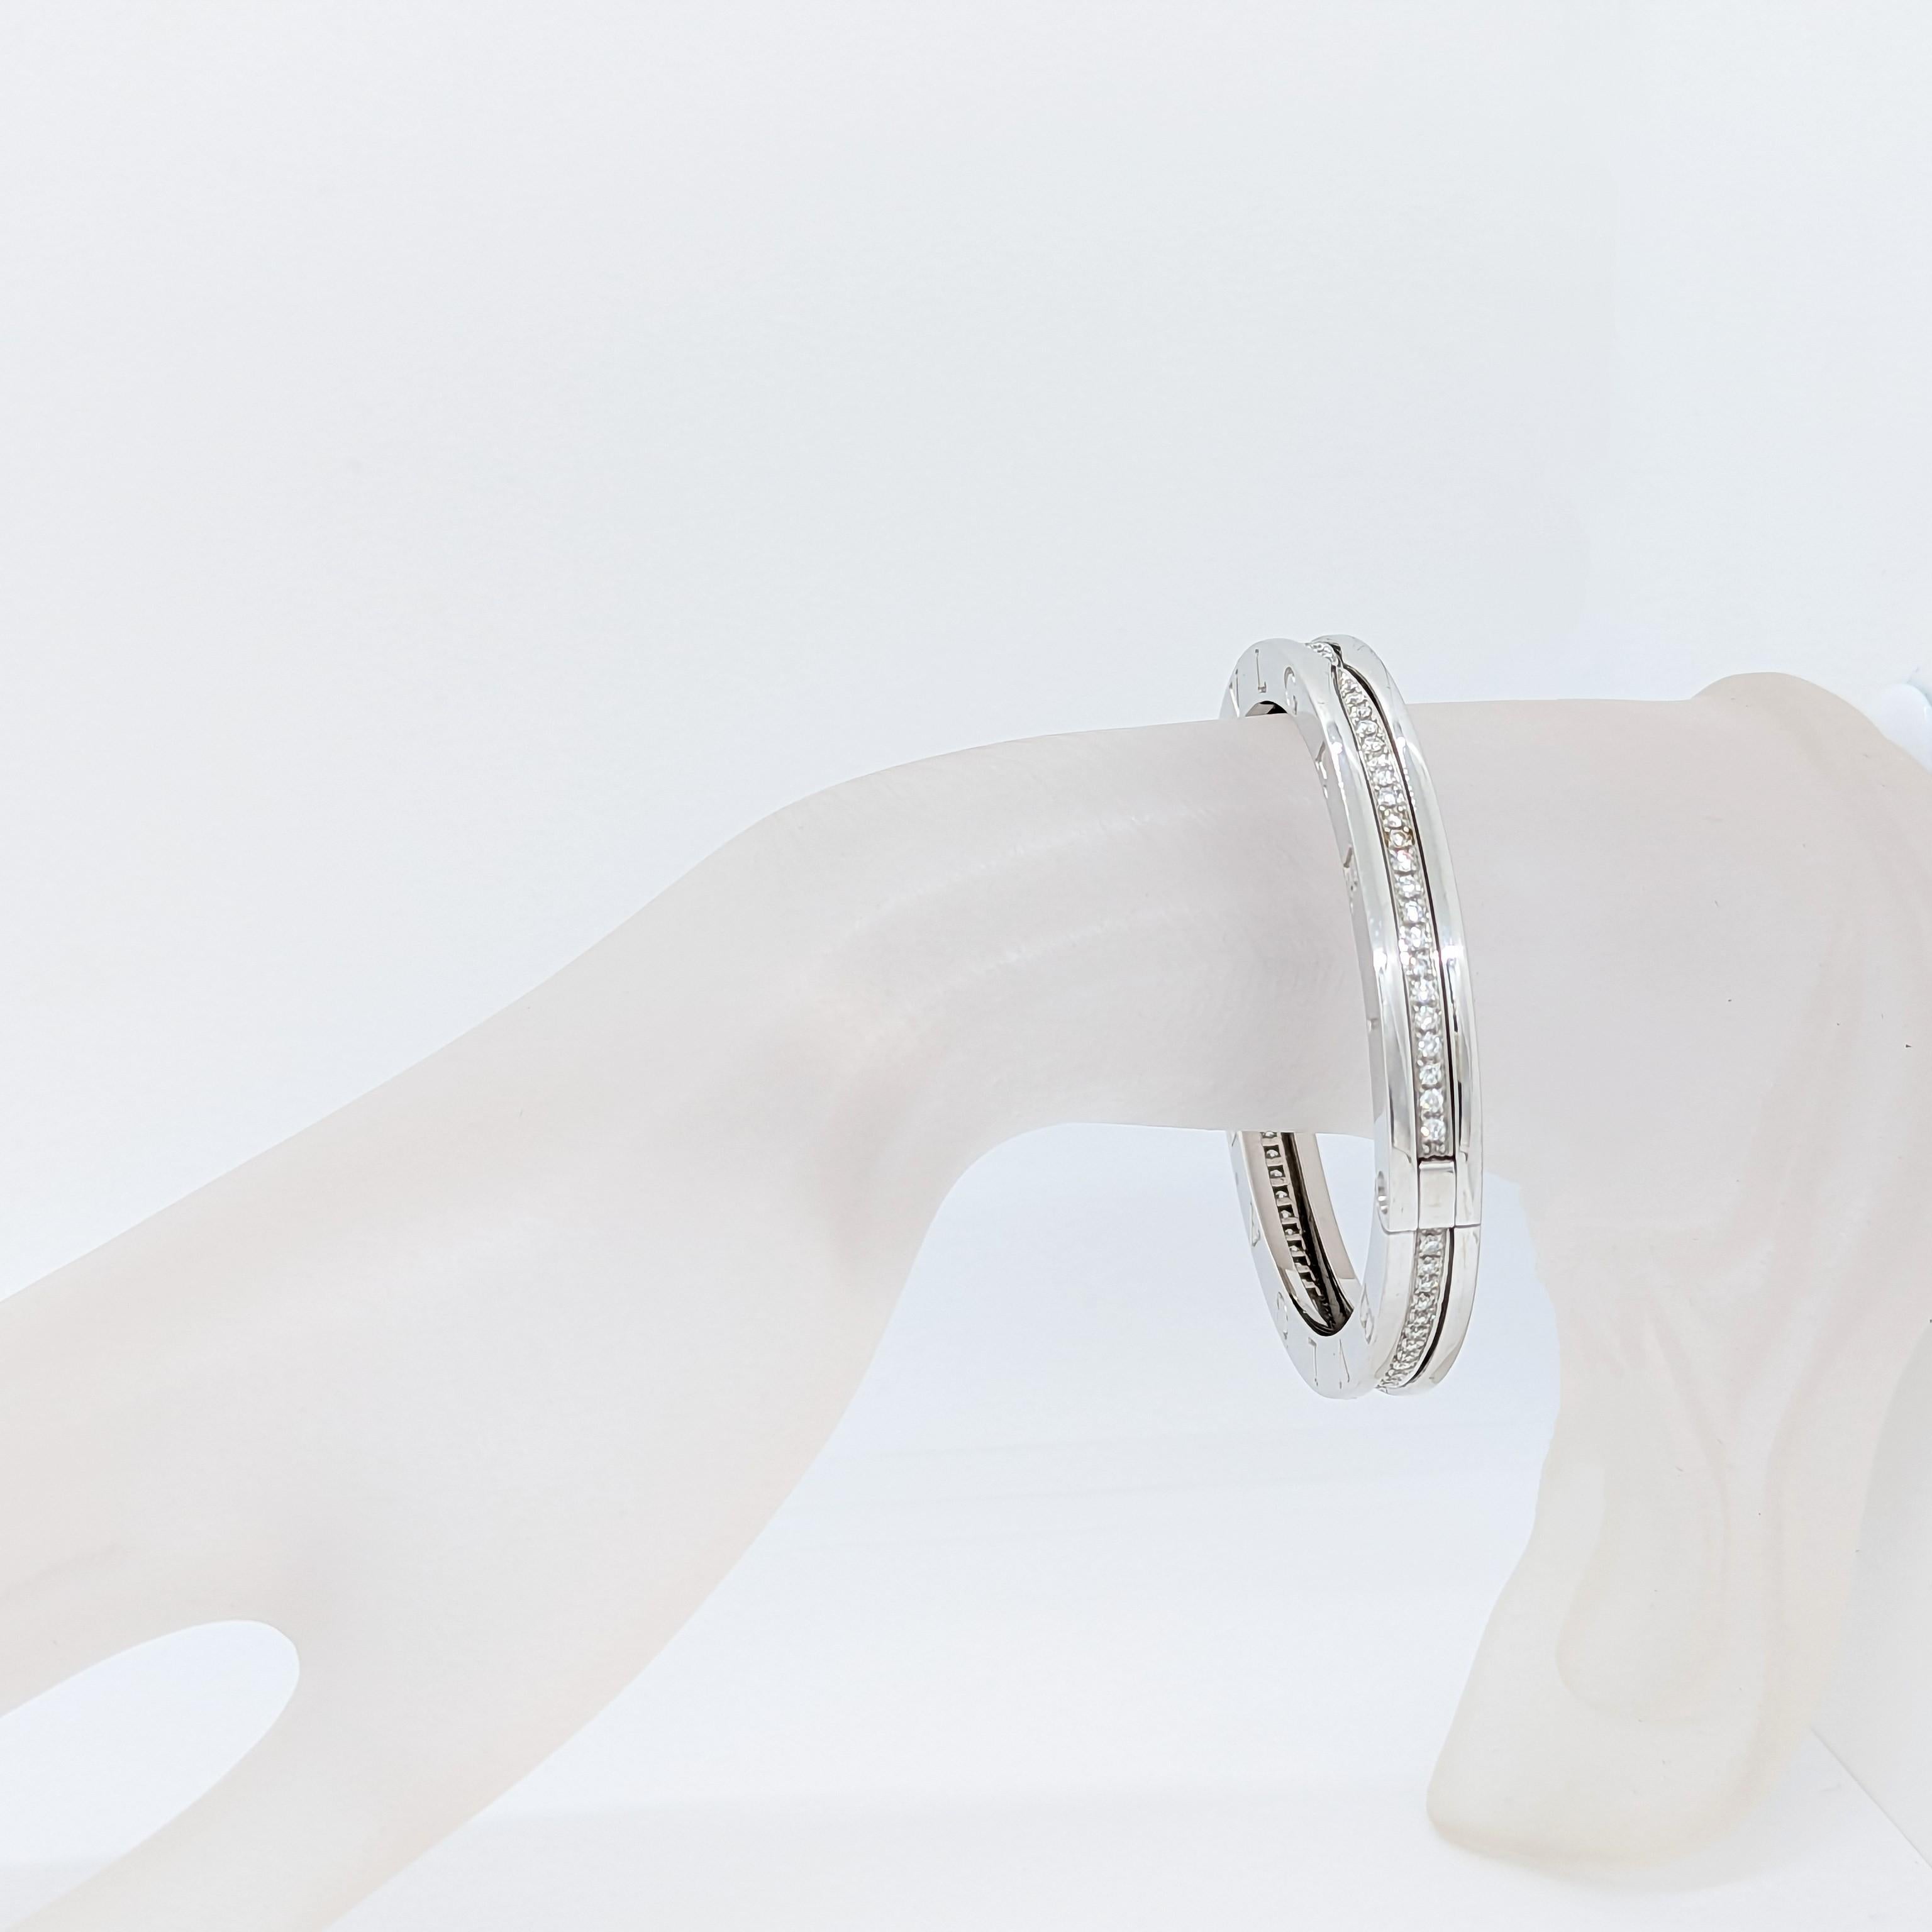 Beautiful estate Bvlgari bangle with good quality white diamond rounds and handmade in 18k white gold. This design is called the B Zero and is part of Bvlgari's classic collection. Current style that is sold in the store.